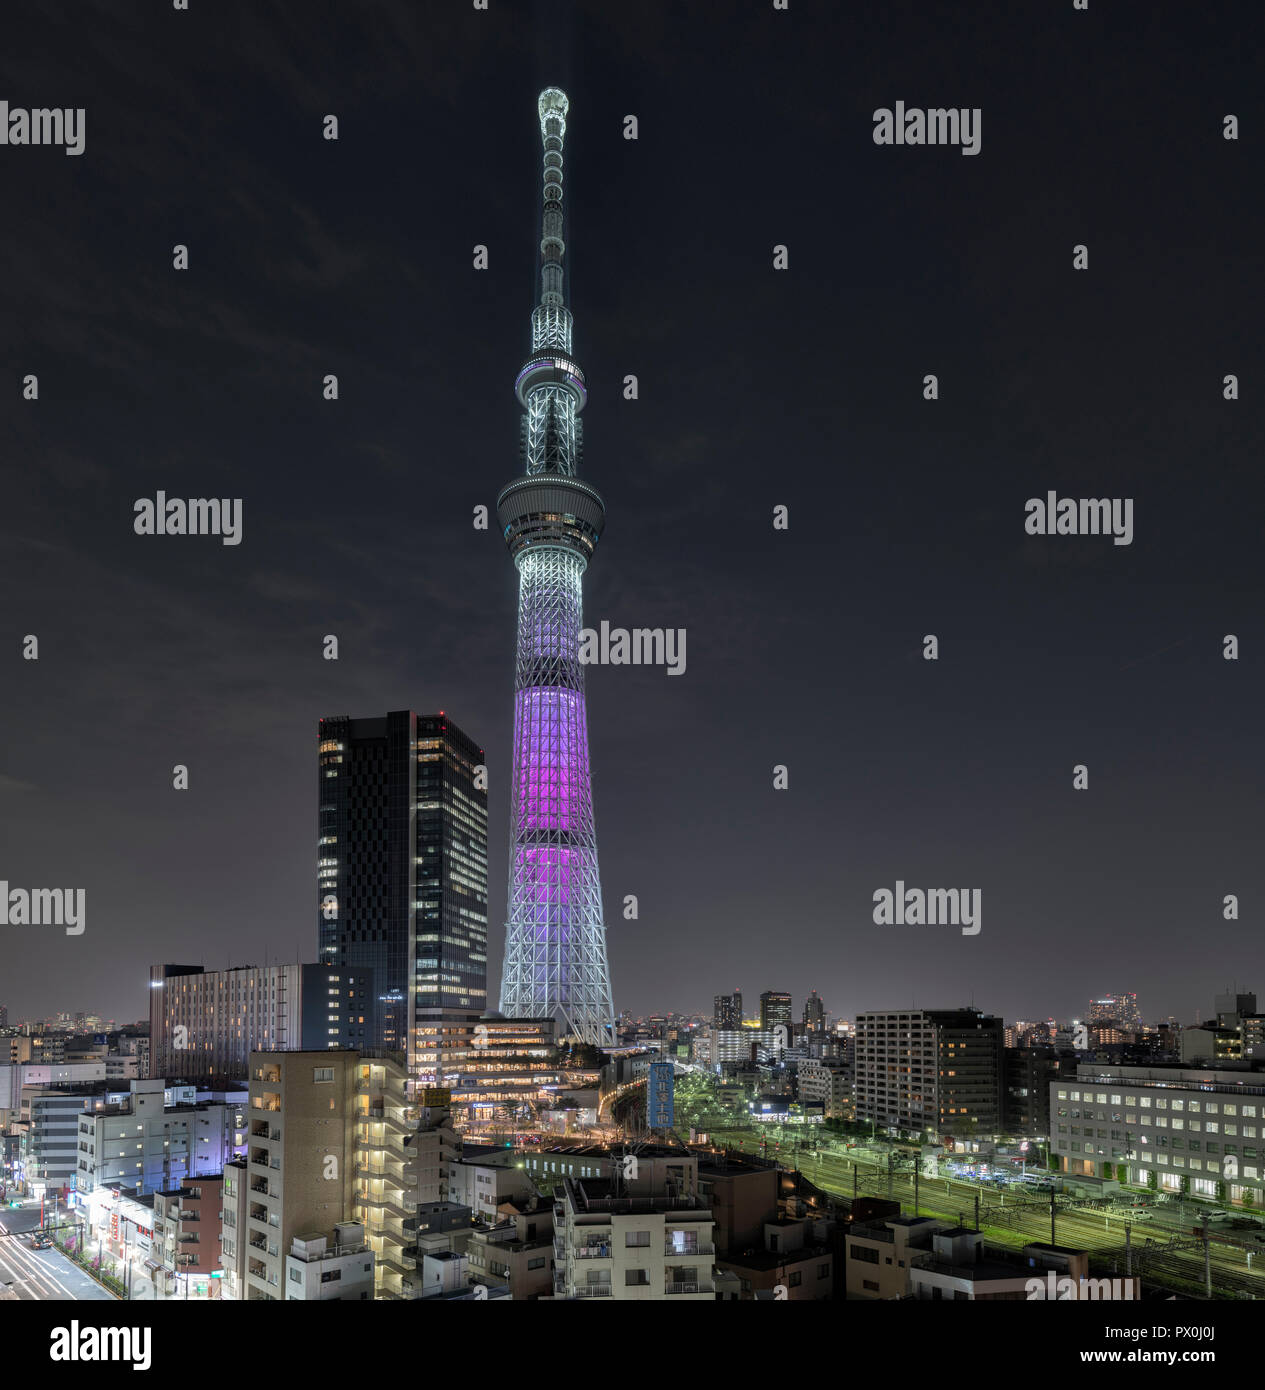 Tokyo Skytree tower in Sumida, Japan with surrounding urban residental context below. The tower was completed in 2012. Stock Photo